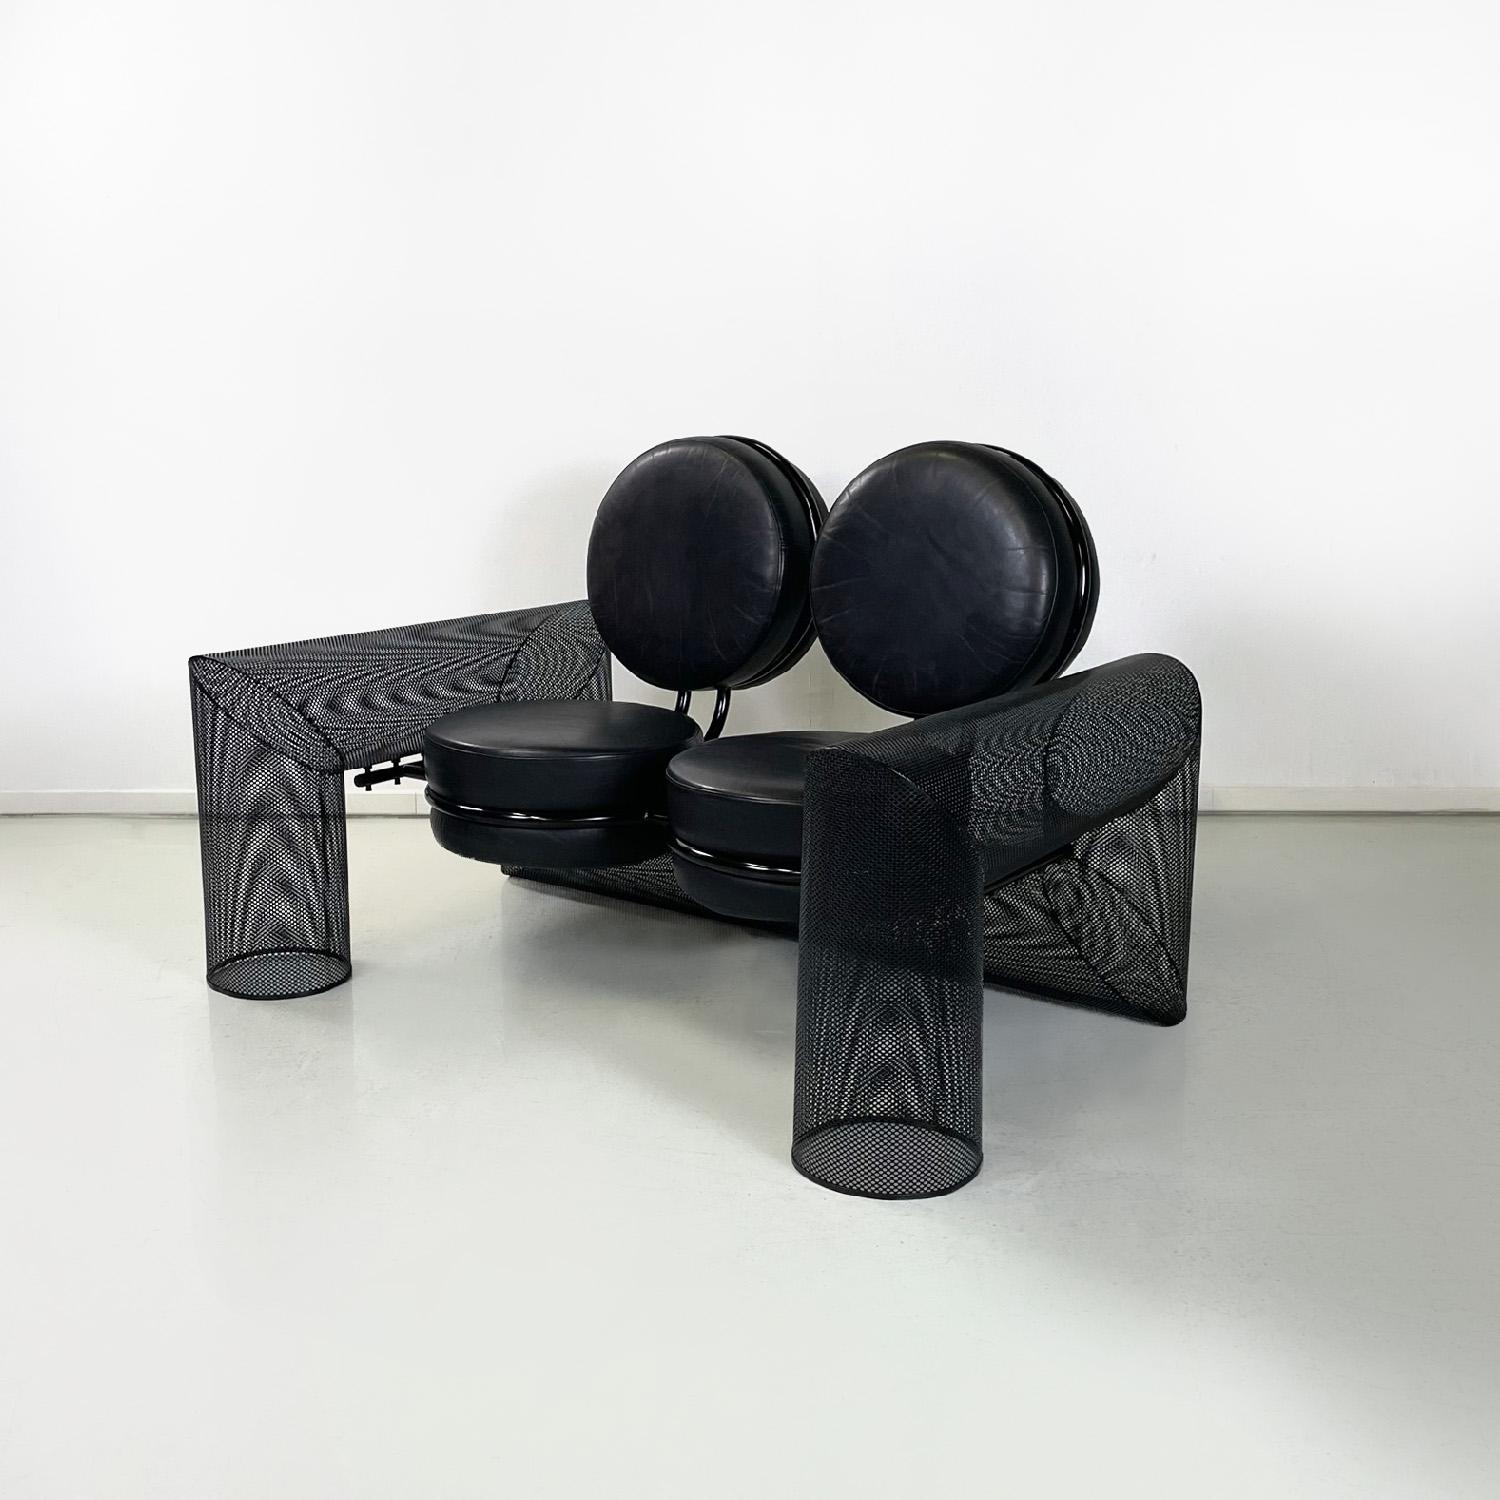 Italian modern black metal sofa Re e Regina by Mario Botta for Alias, 1985
Sofa mod. King and Queen two seater. The structure is entirely in perforated metal sheet painted black with a glossy finish, it is cylindrical in shape and makes up both the